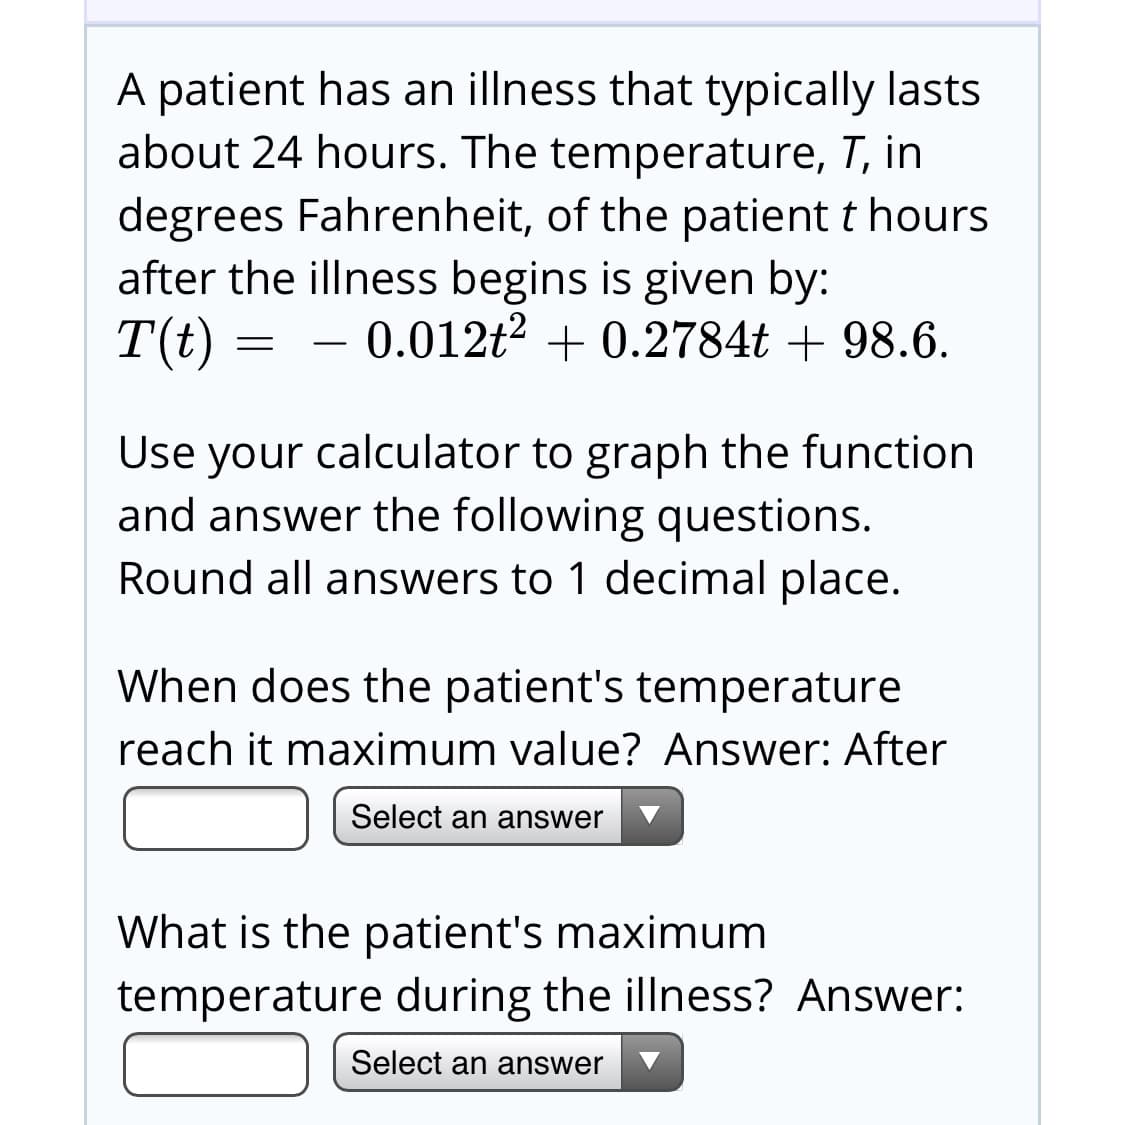 A patient has an illness that typically lasts
about 24 hours. The temperature, T, in
degrees Fahrenheit, of the patient t hours
after the illness begins is given by:
T(t)
0.012t2 + 0.2784t + 98.6.
Use your calculator to graph the function
and answer the following questions.
Round all answers to 1 decimal place.
When does the patient's temperature
reach it maximum value? Answer: After
Select an answer
What is the patient's maximum
temperature during the illness? Answer:
Select an answer
